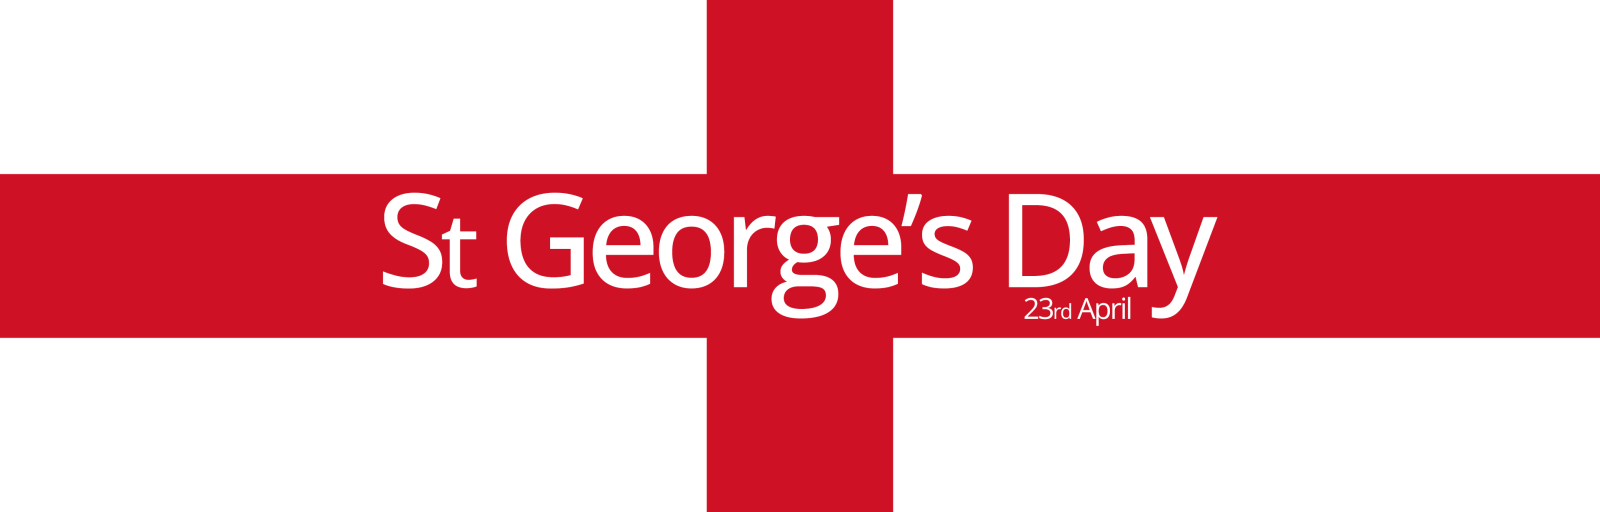 St George's Day - De Wolfe Music